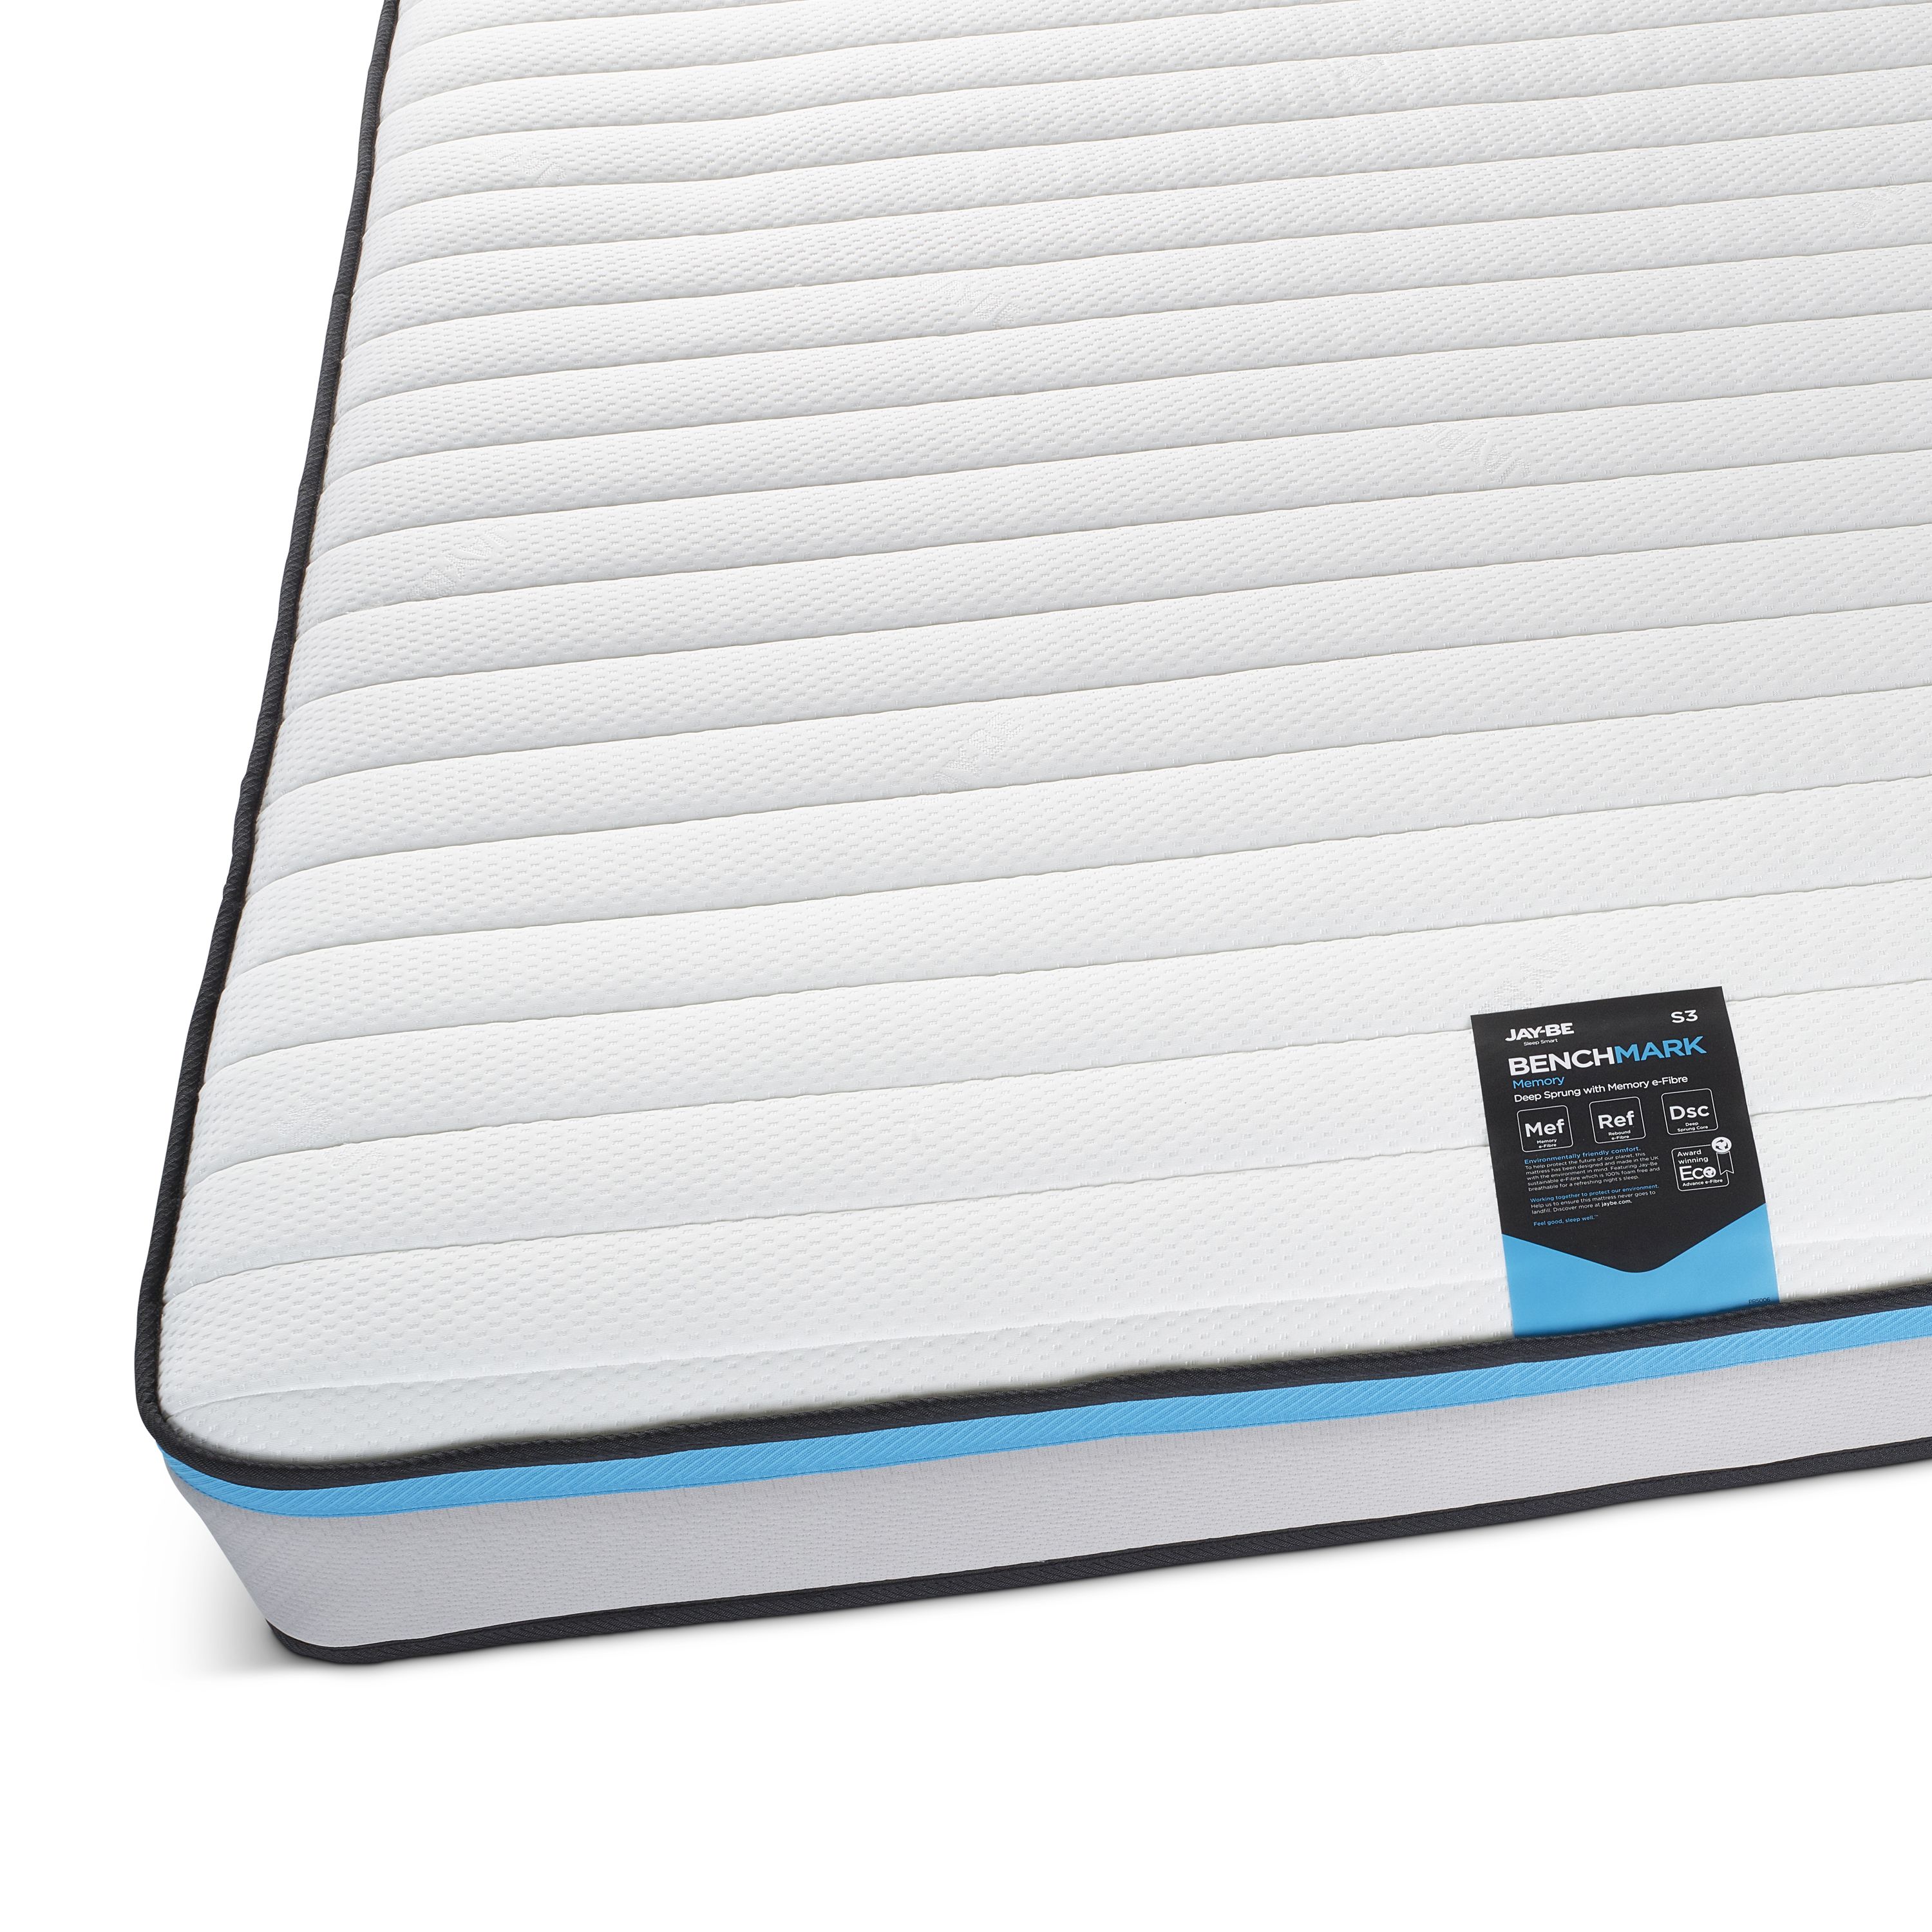 Jay-Be Benchmark S3 Memory Eco Friendly Open coil Water resistant King Mattress